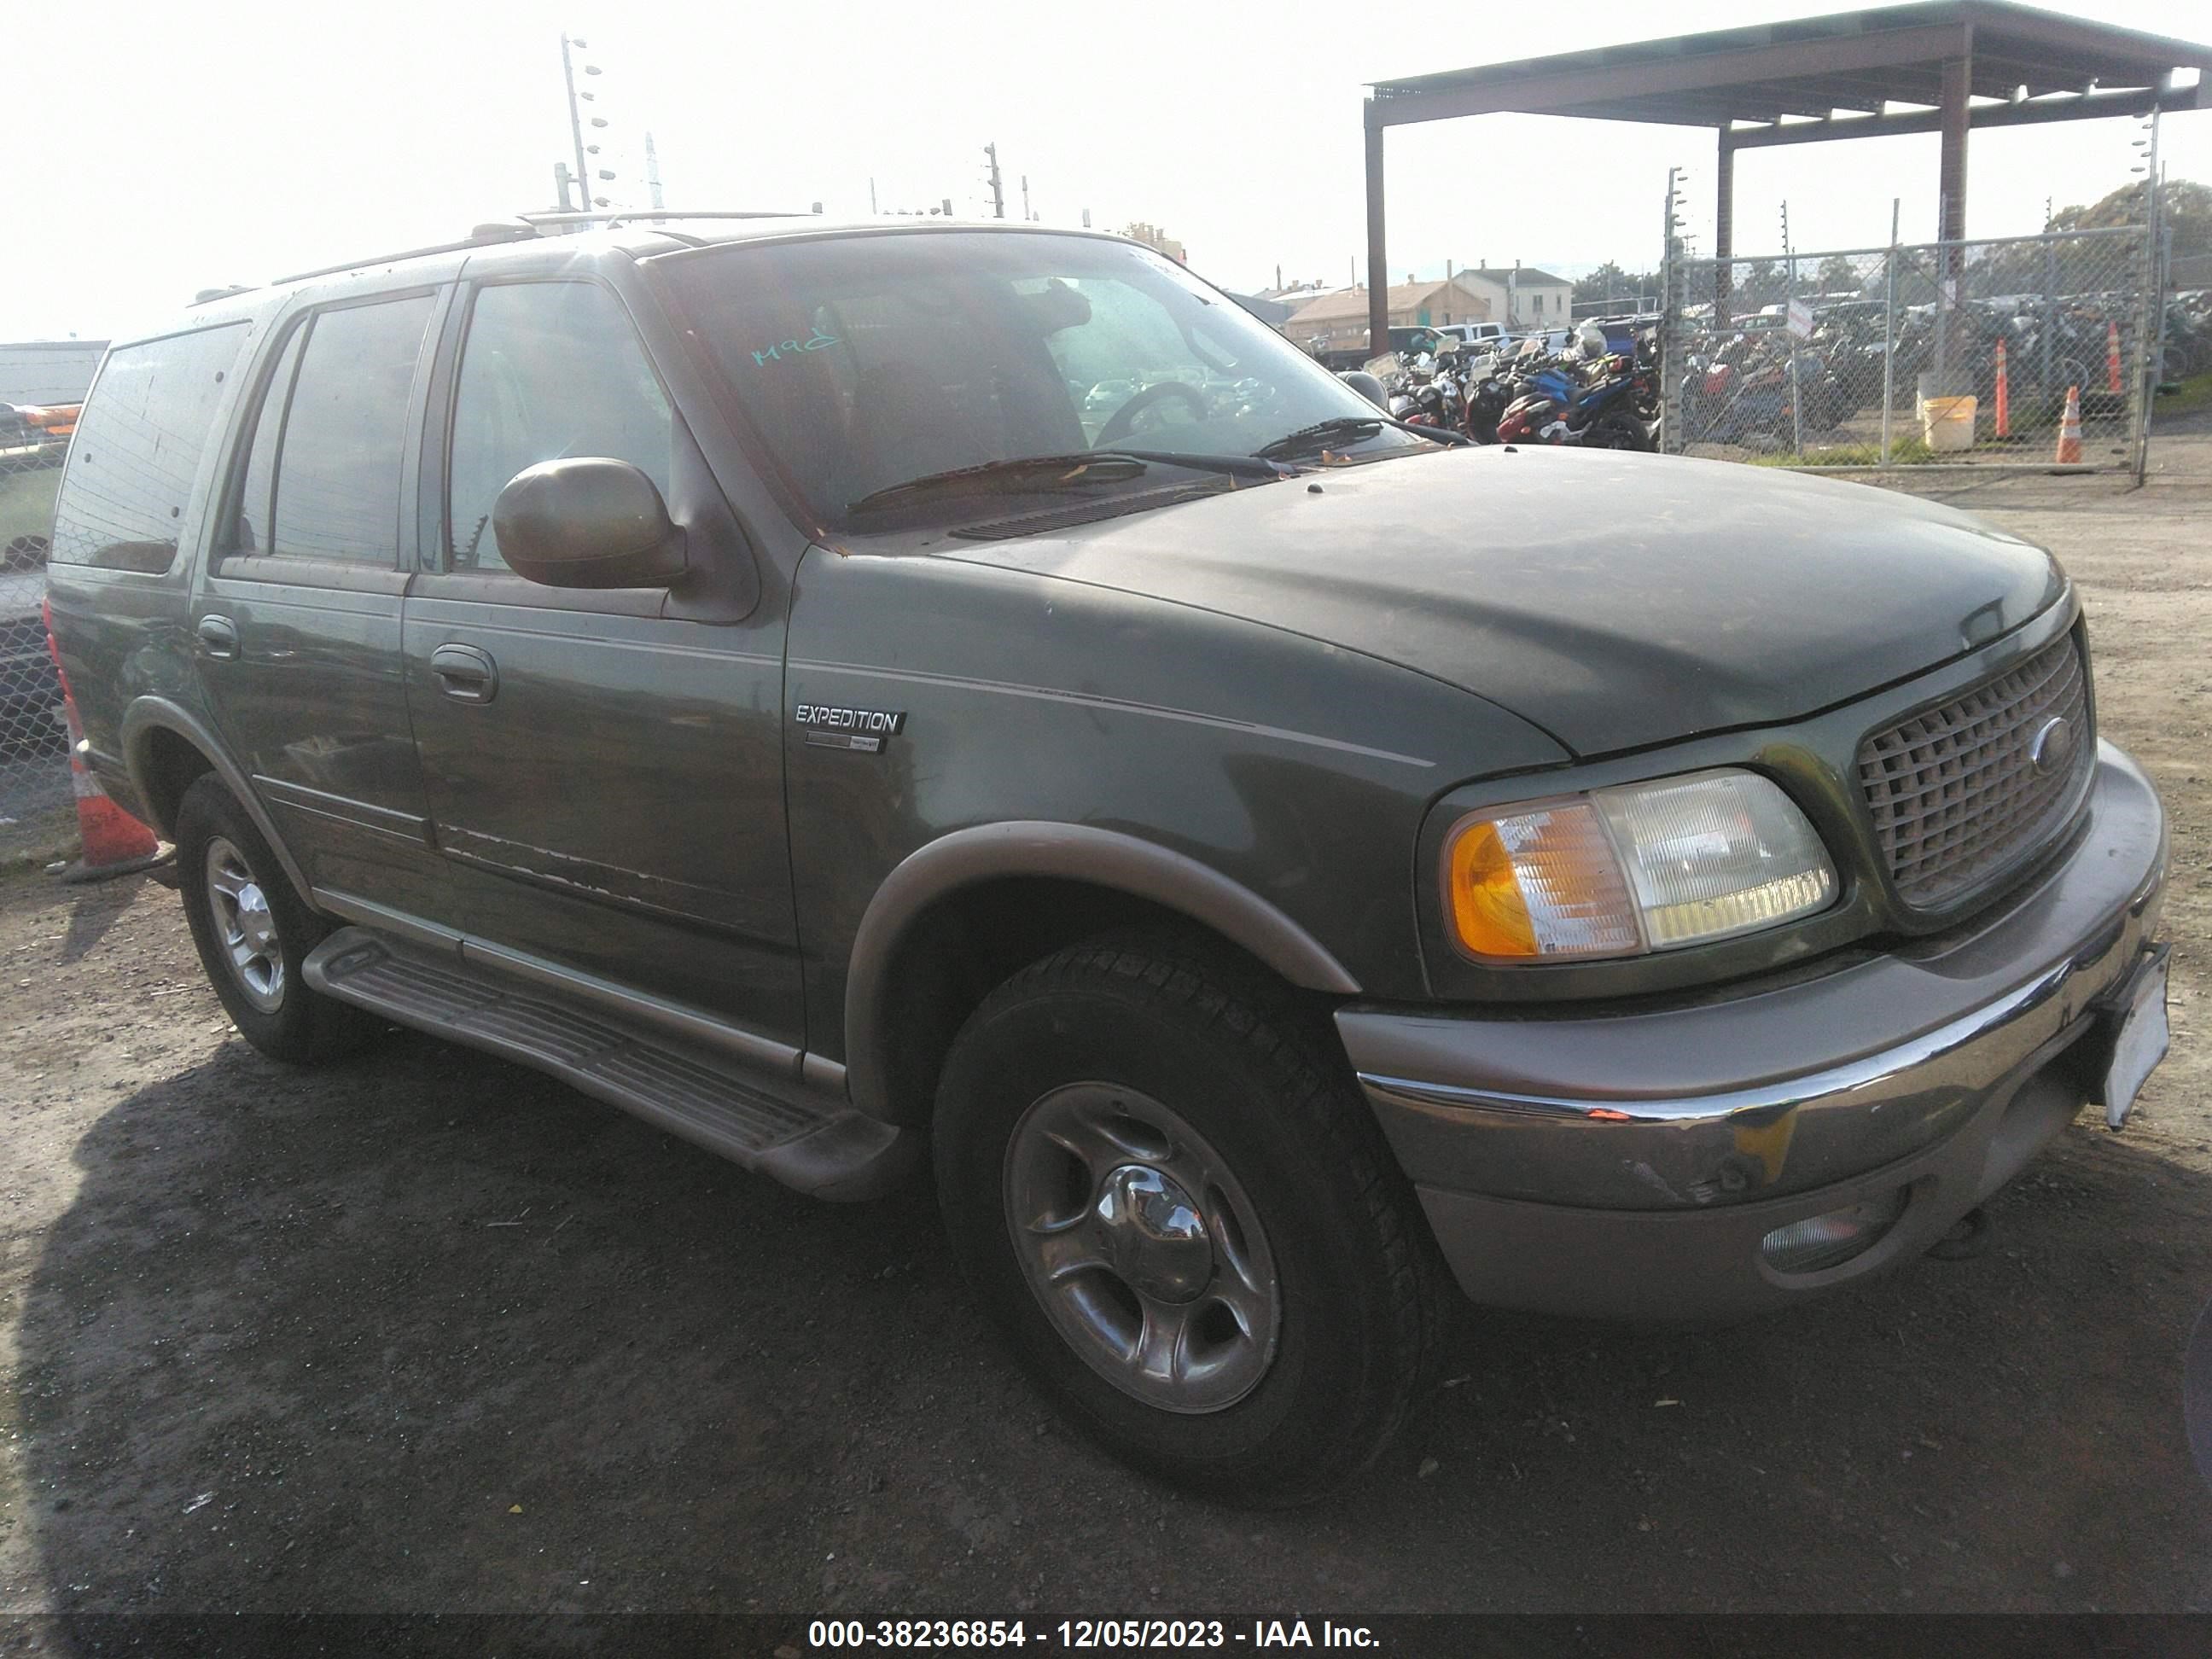 VIN: 1FMFU18L31LB05601 - ford expedition